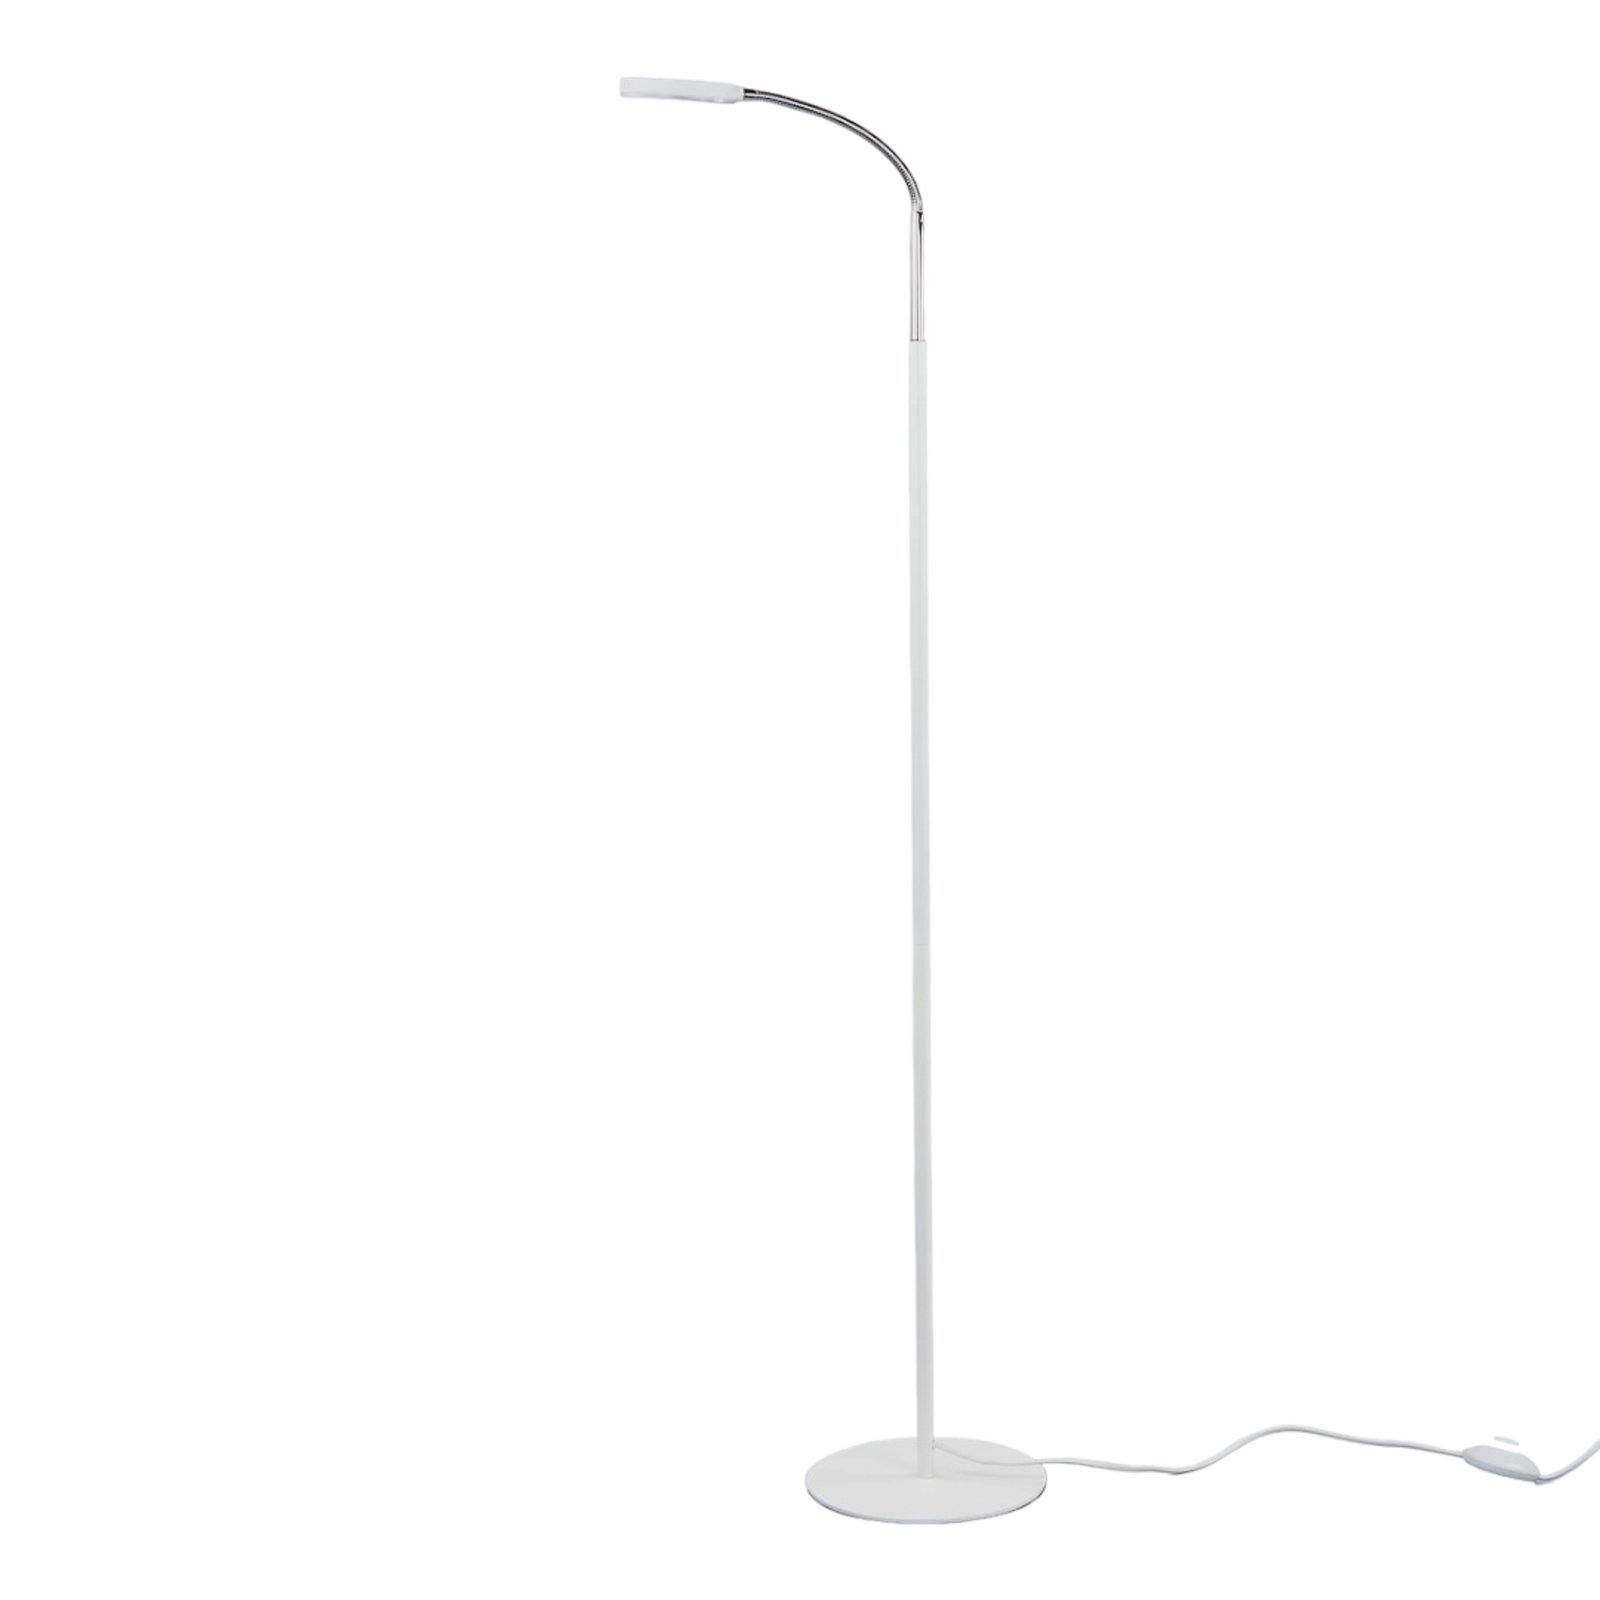 Lindby LED floor lamp Milow, white, 140 cm high, foot switch